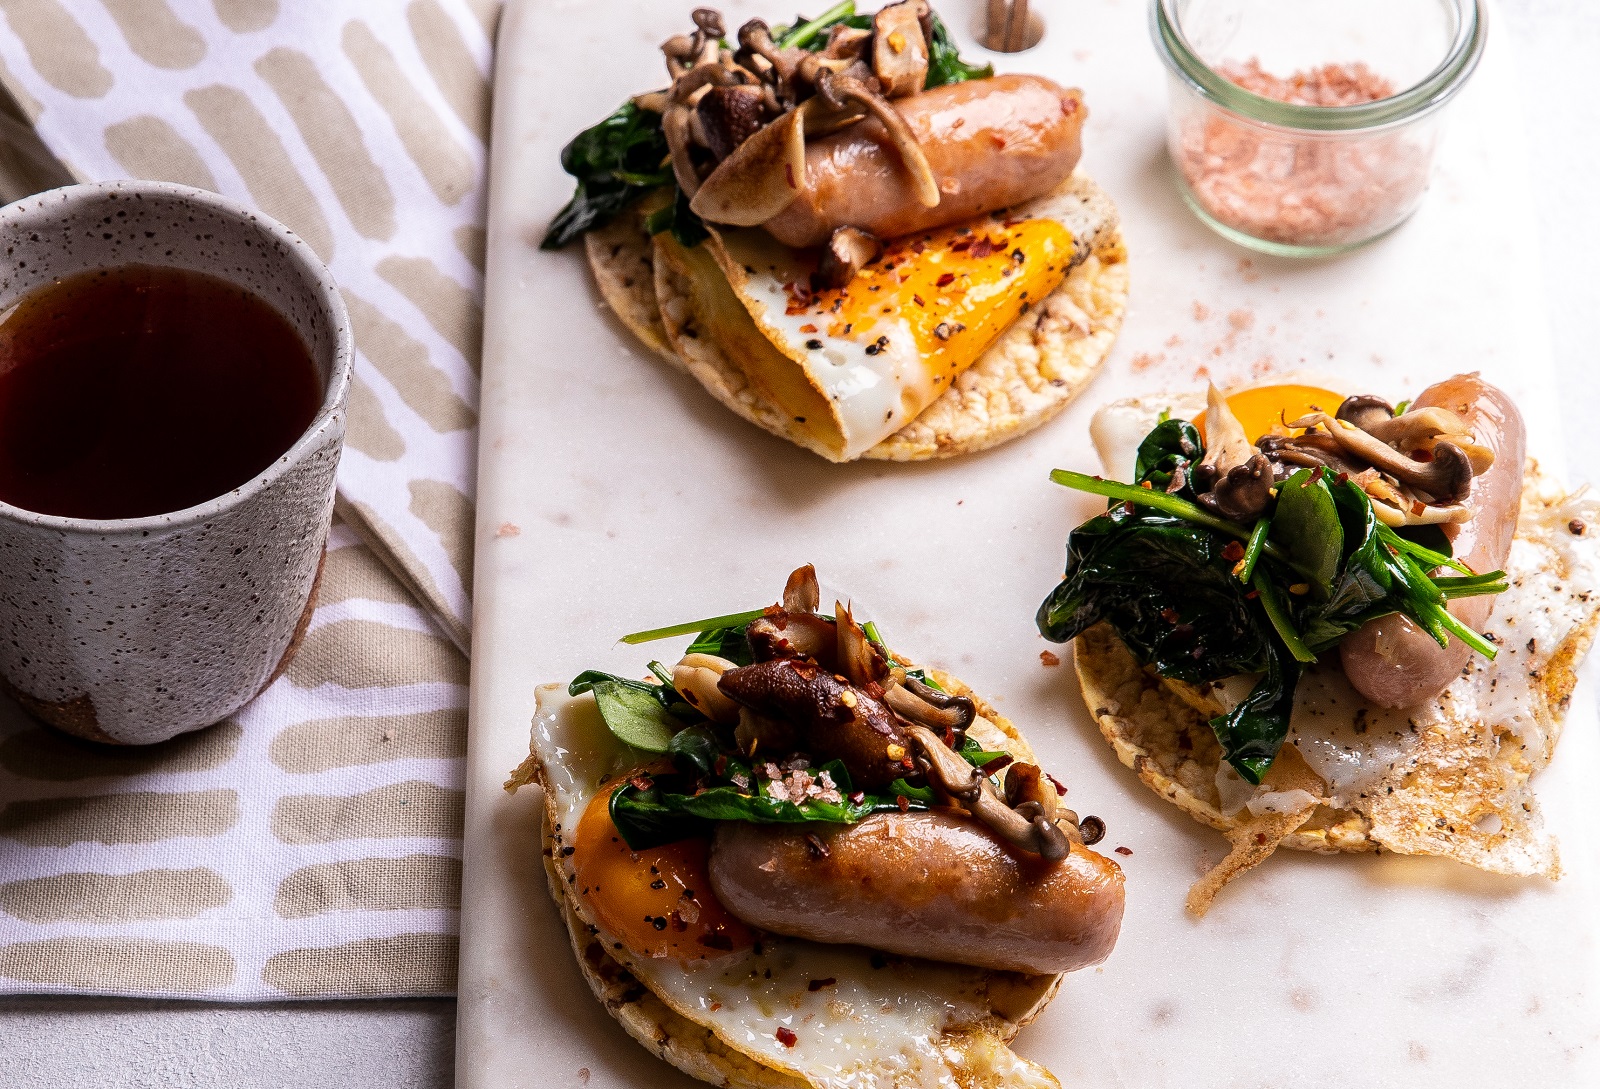 A big breakfast of Fried Egg, Sausage, Mushroom & Spinach on Corn Thins slices